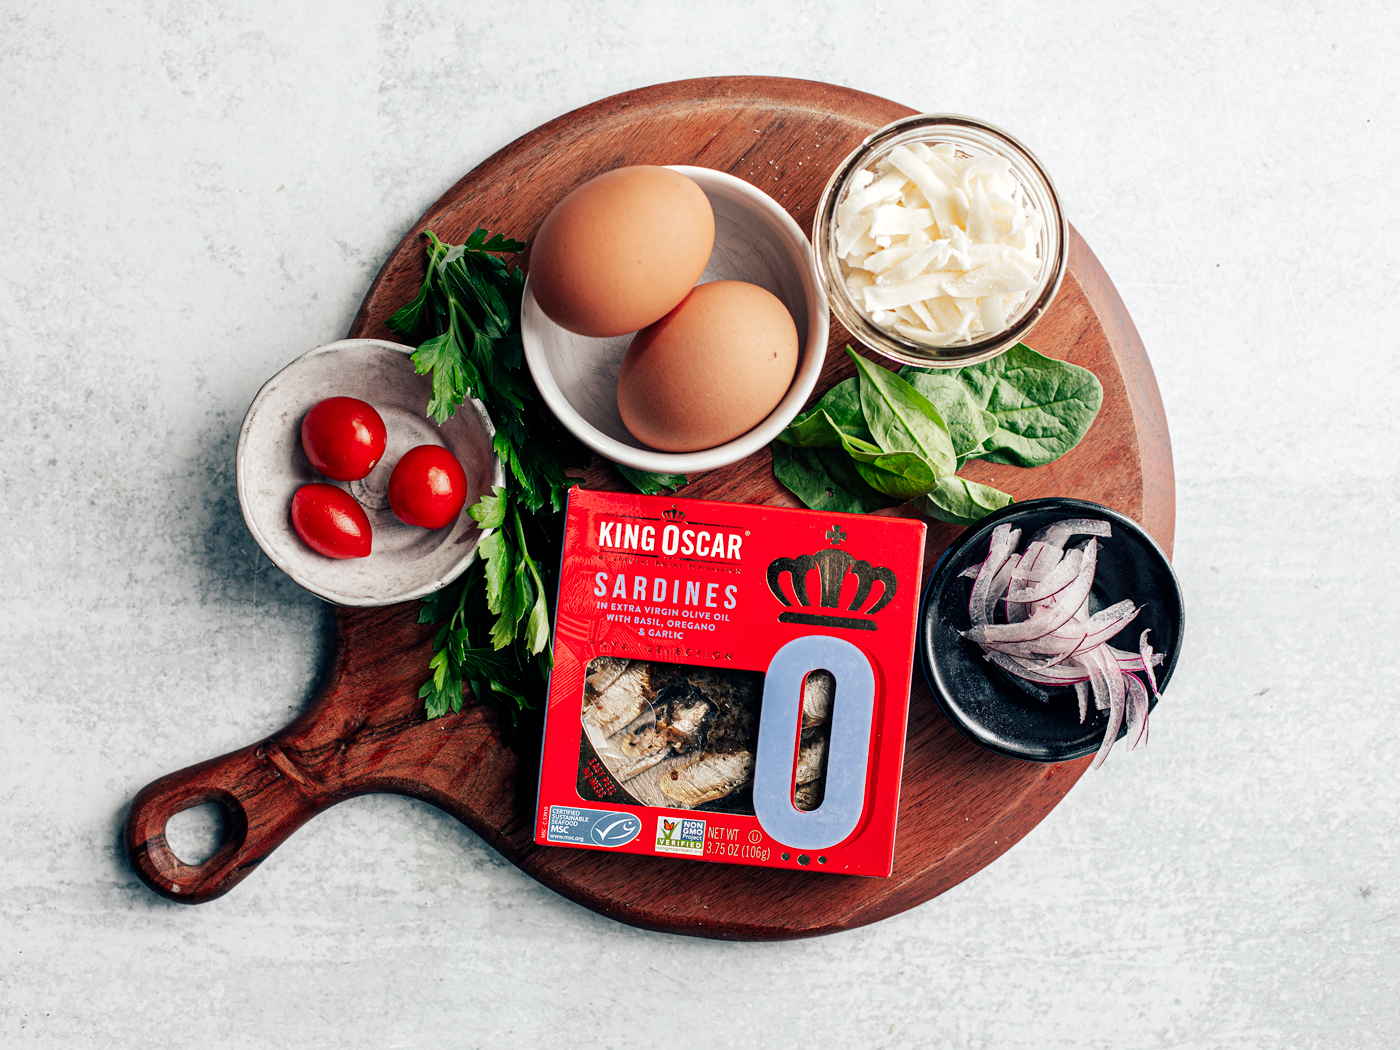 Round wooden serving board with eggs, cherry tomatoes, parsley, spinach, onions, and package of sardines on top.